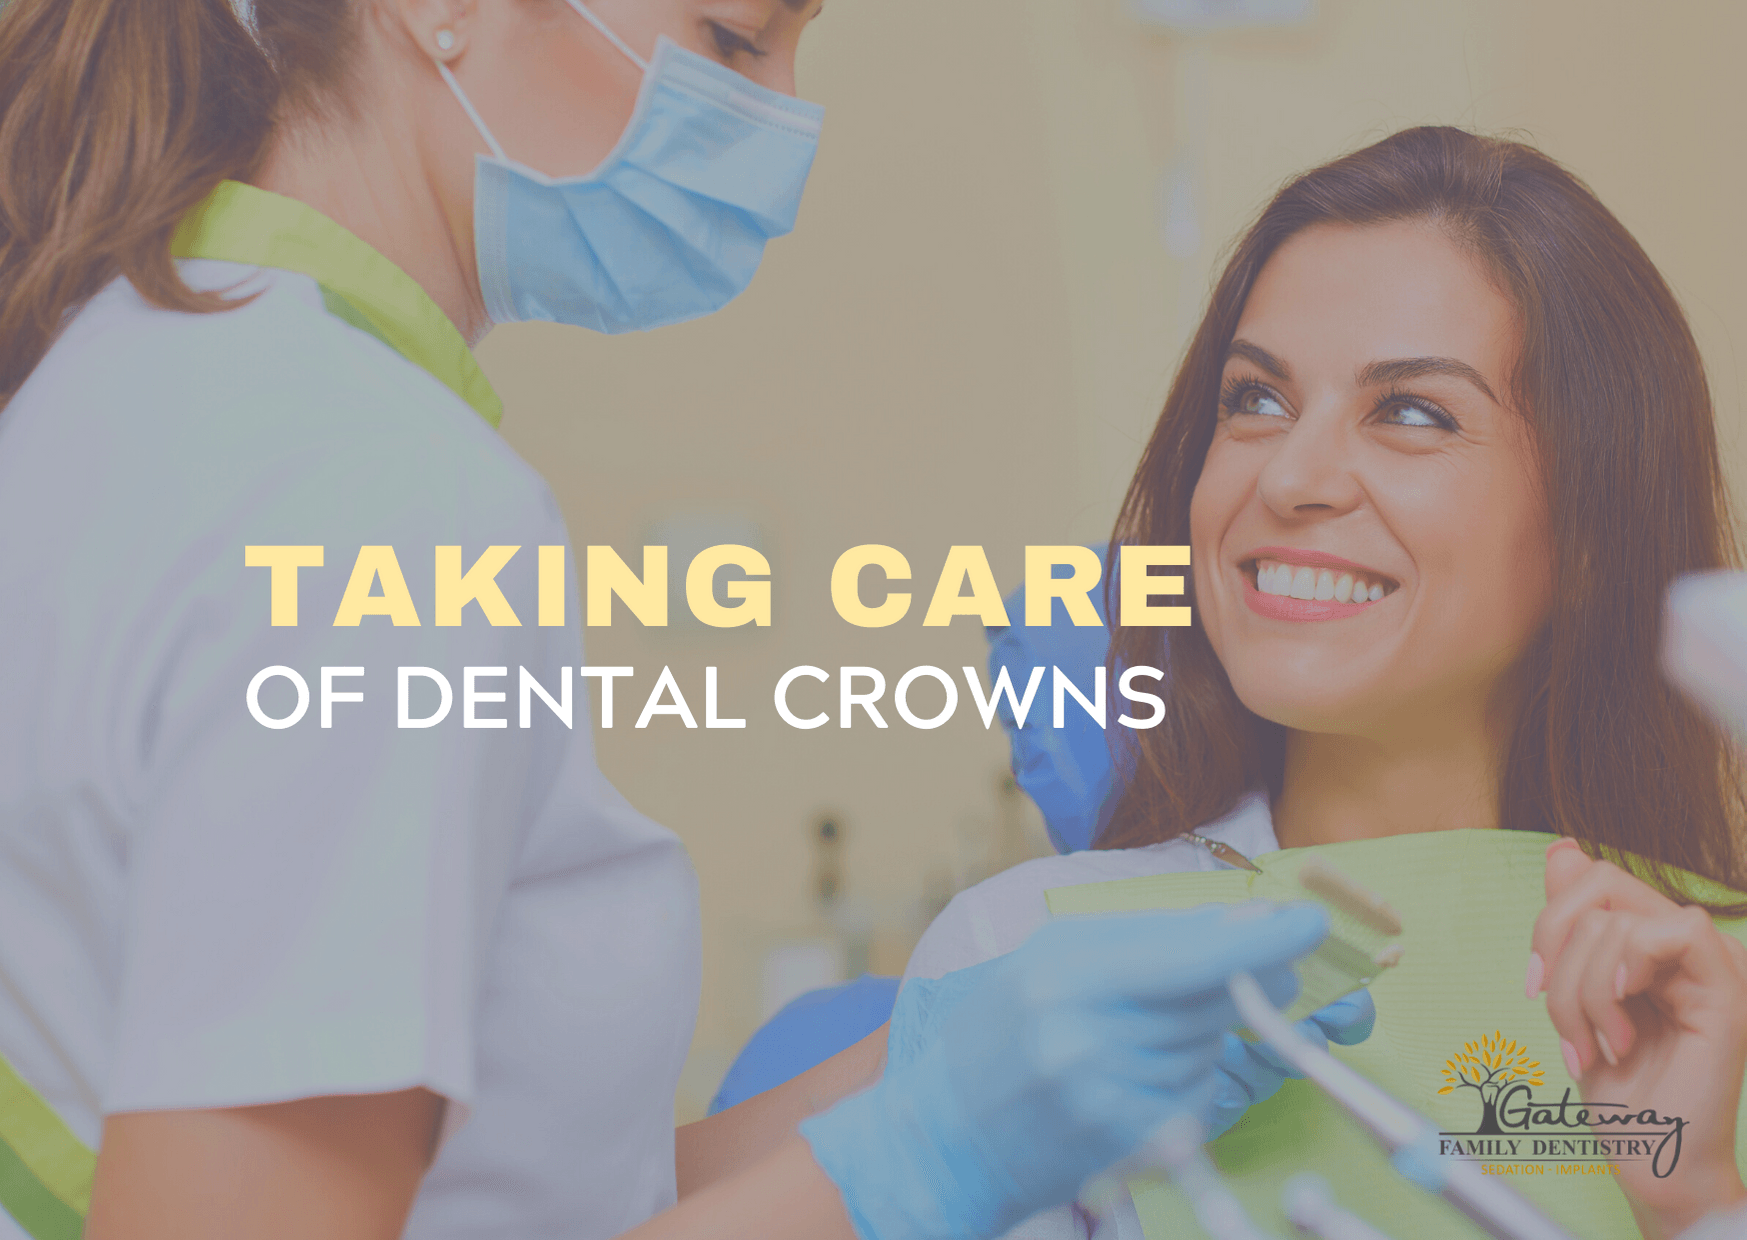 Taking care of dental crowns Gateway Family Dentistry